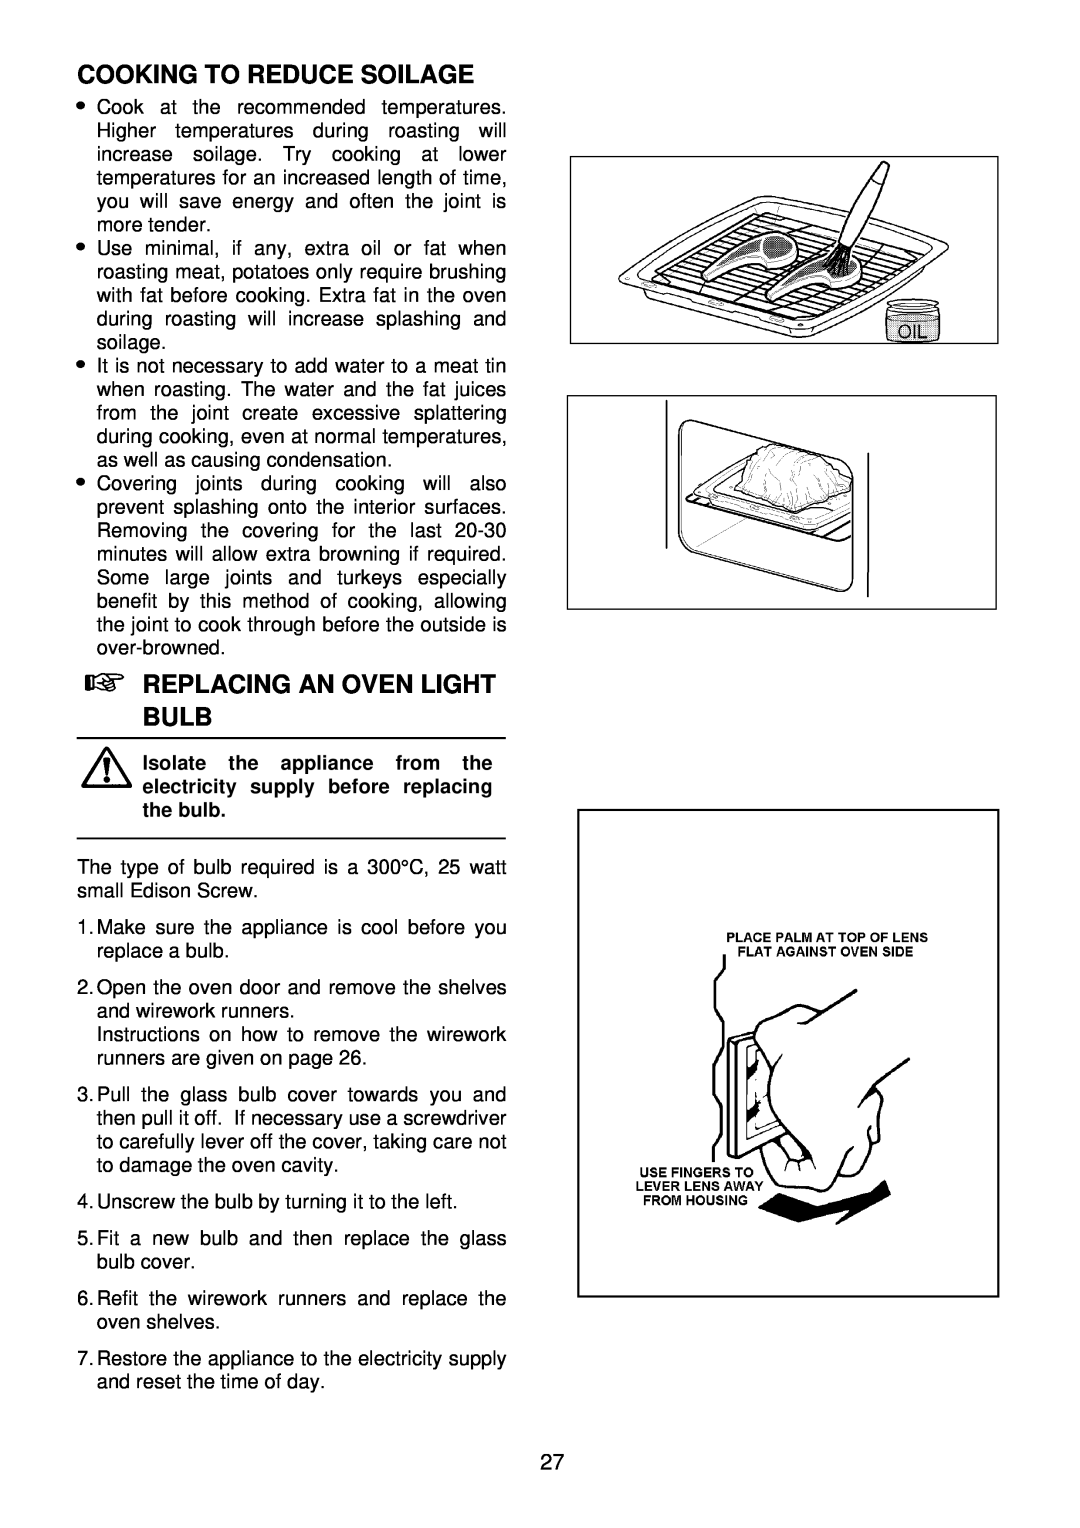 Electrolux EDB705 manual Cooking To Reduce Soilage, Replacing An Oven Light Bulb 